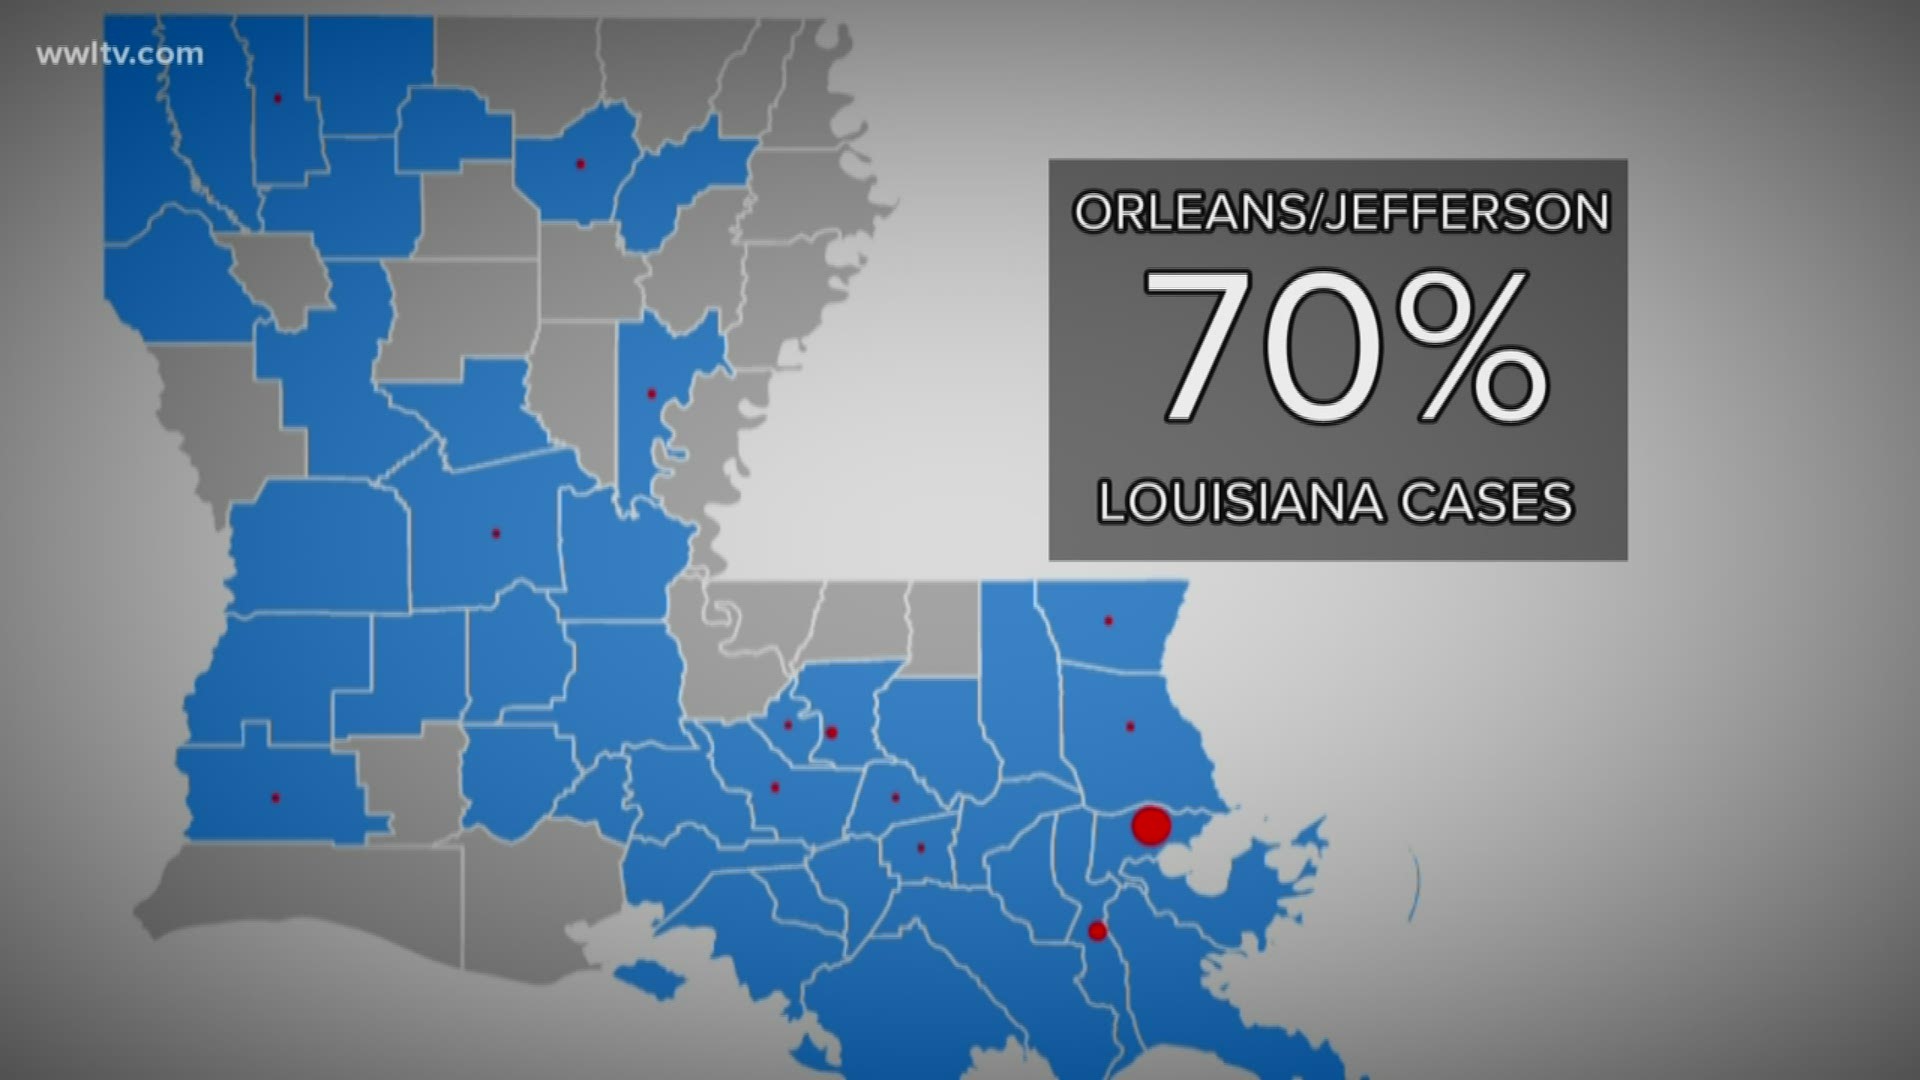 Louisiana, and New Orleans in particular, has some of the highest rates of COVID-19 spread in the country.